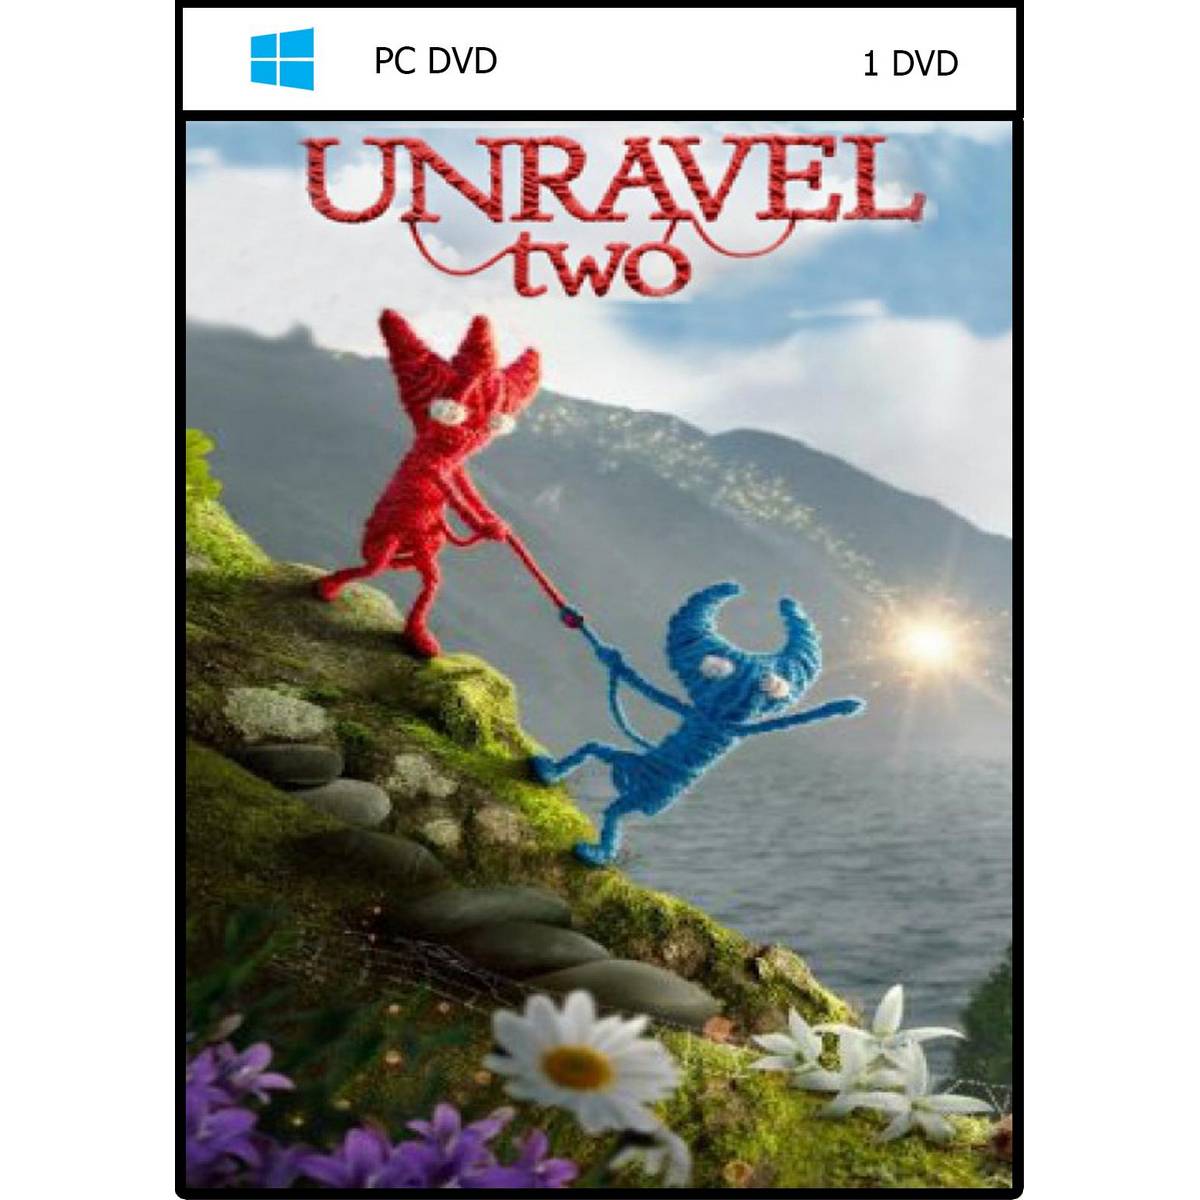 unravel two where to buy